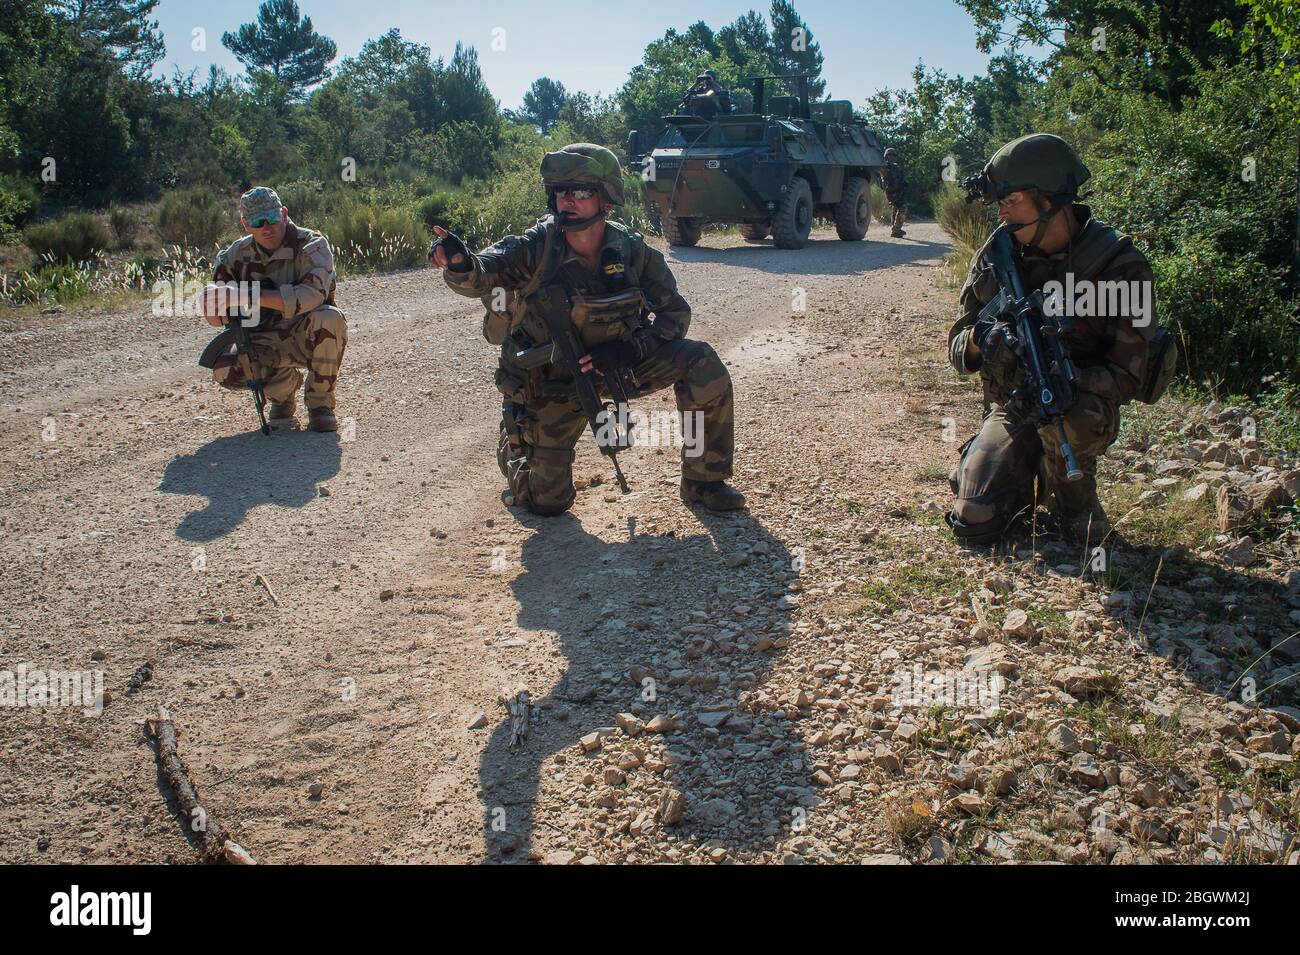 DRAGUIGNAN, FRANCE - JULY 21: simulation of conflict between soldiers and terorists with fake corpses, fake terrorists and fake wounds during the prep Stock Photo